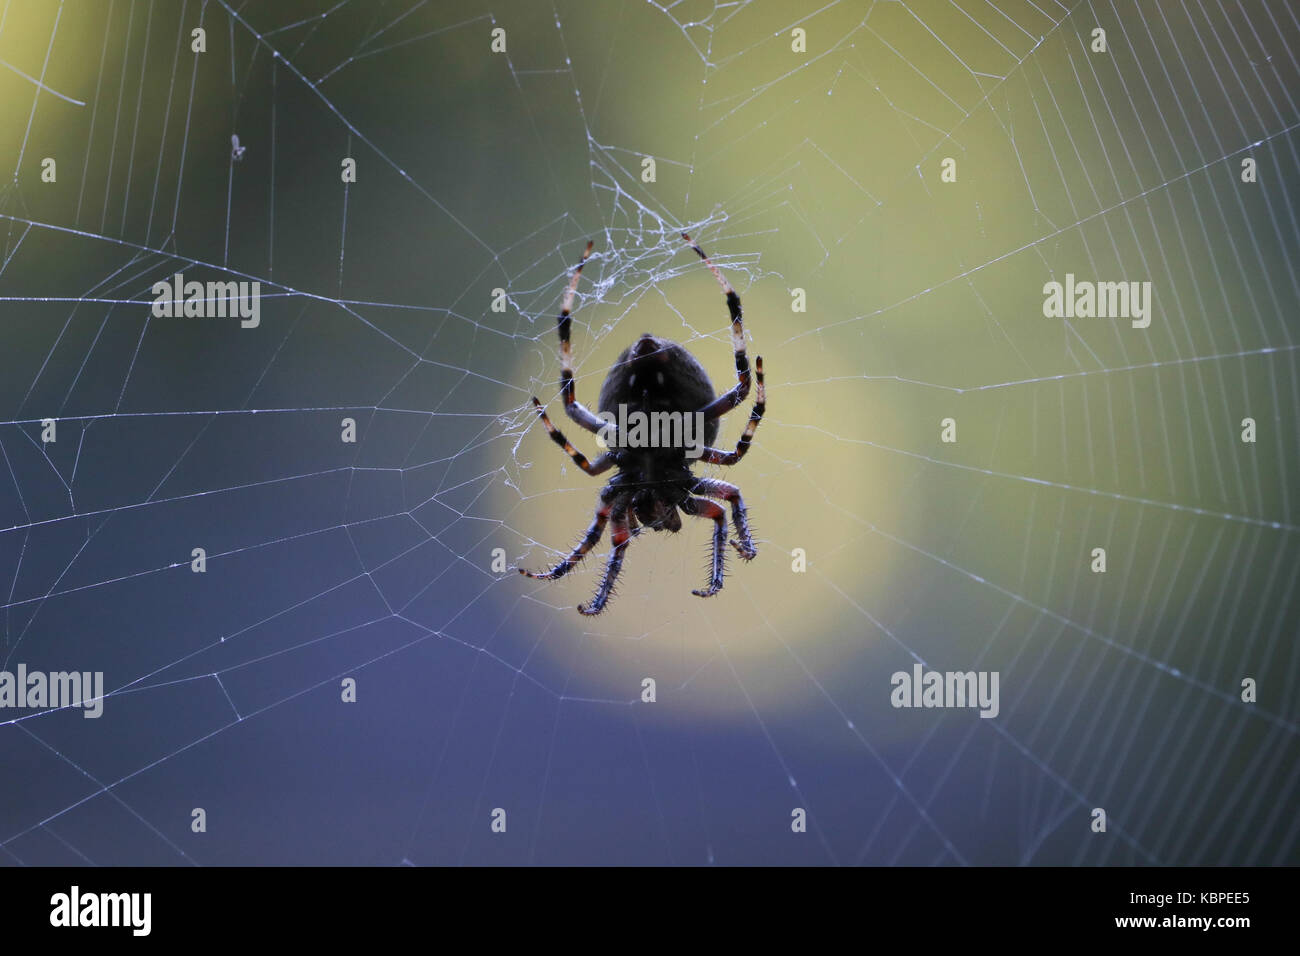 Big spider in center of his web against a blurred green background Stock Photo